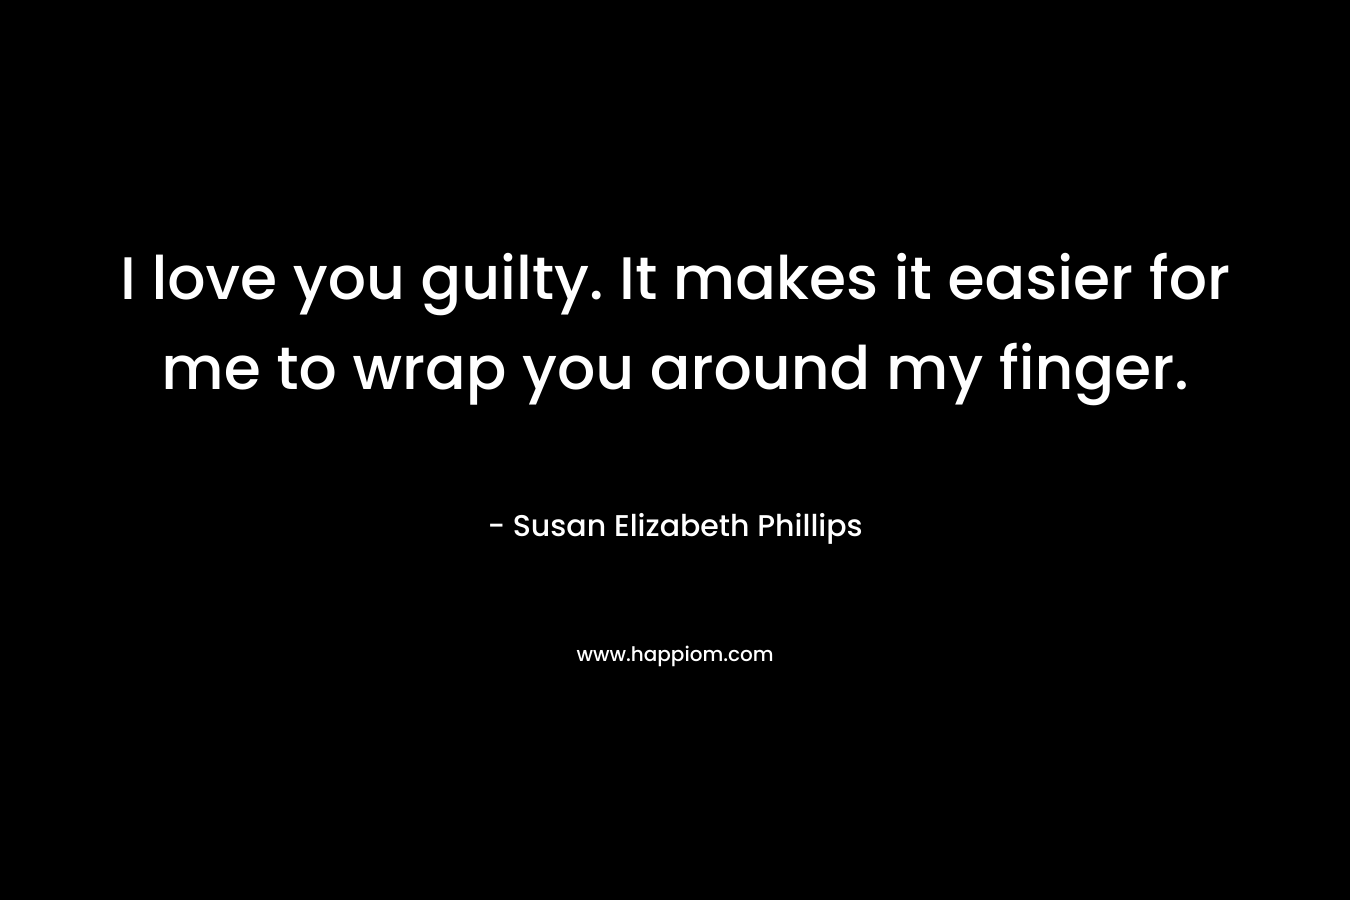 I love you guilty. It makes it easier for me to wrap you around my finger. – Susan Elizabeth Phillips